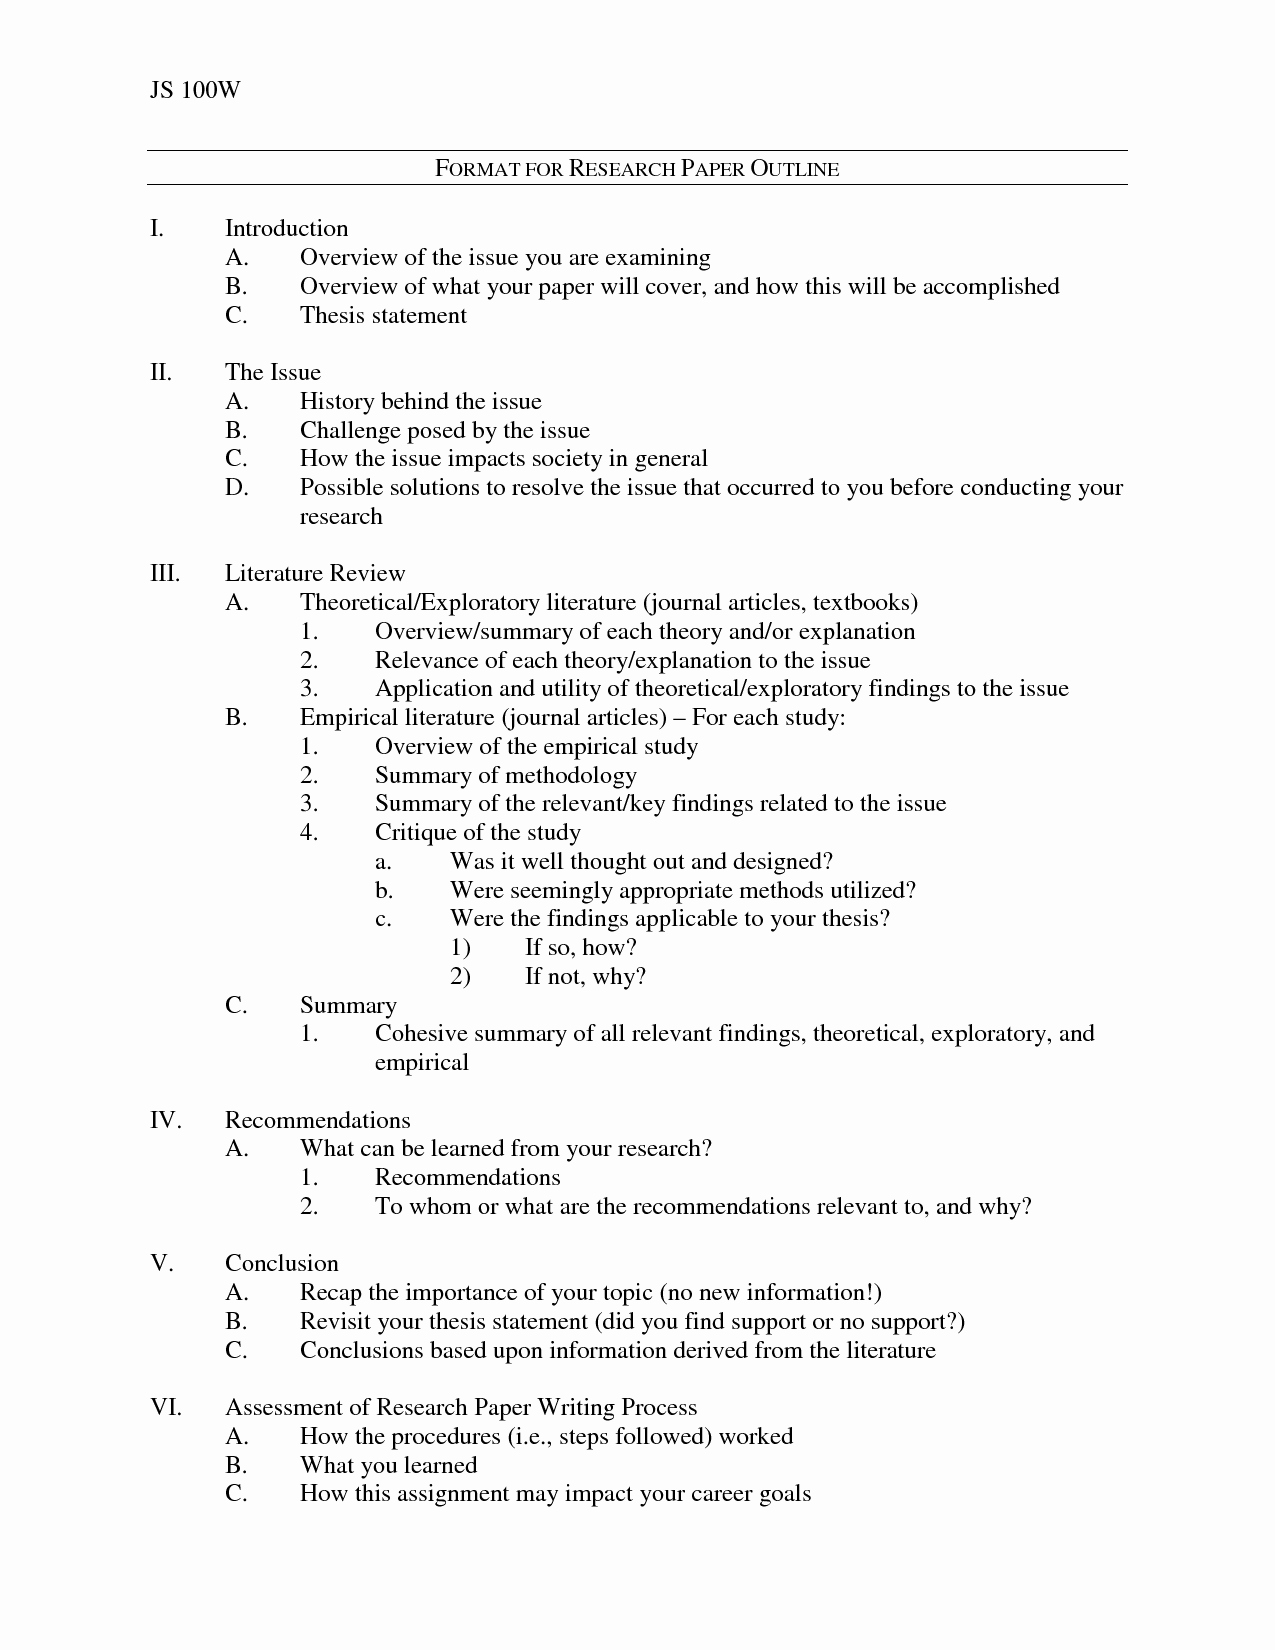 College Research Paper Example Awesome Research Paper Outline format by Vvg 93p8publ